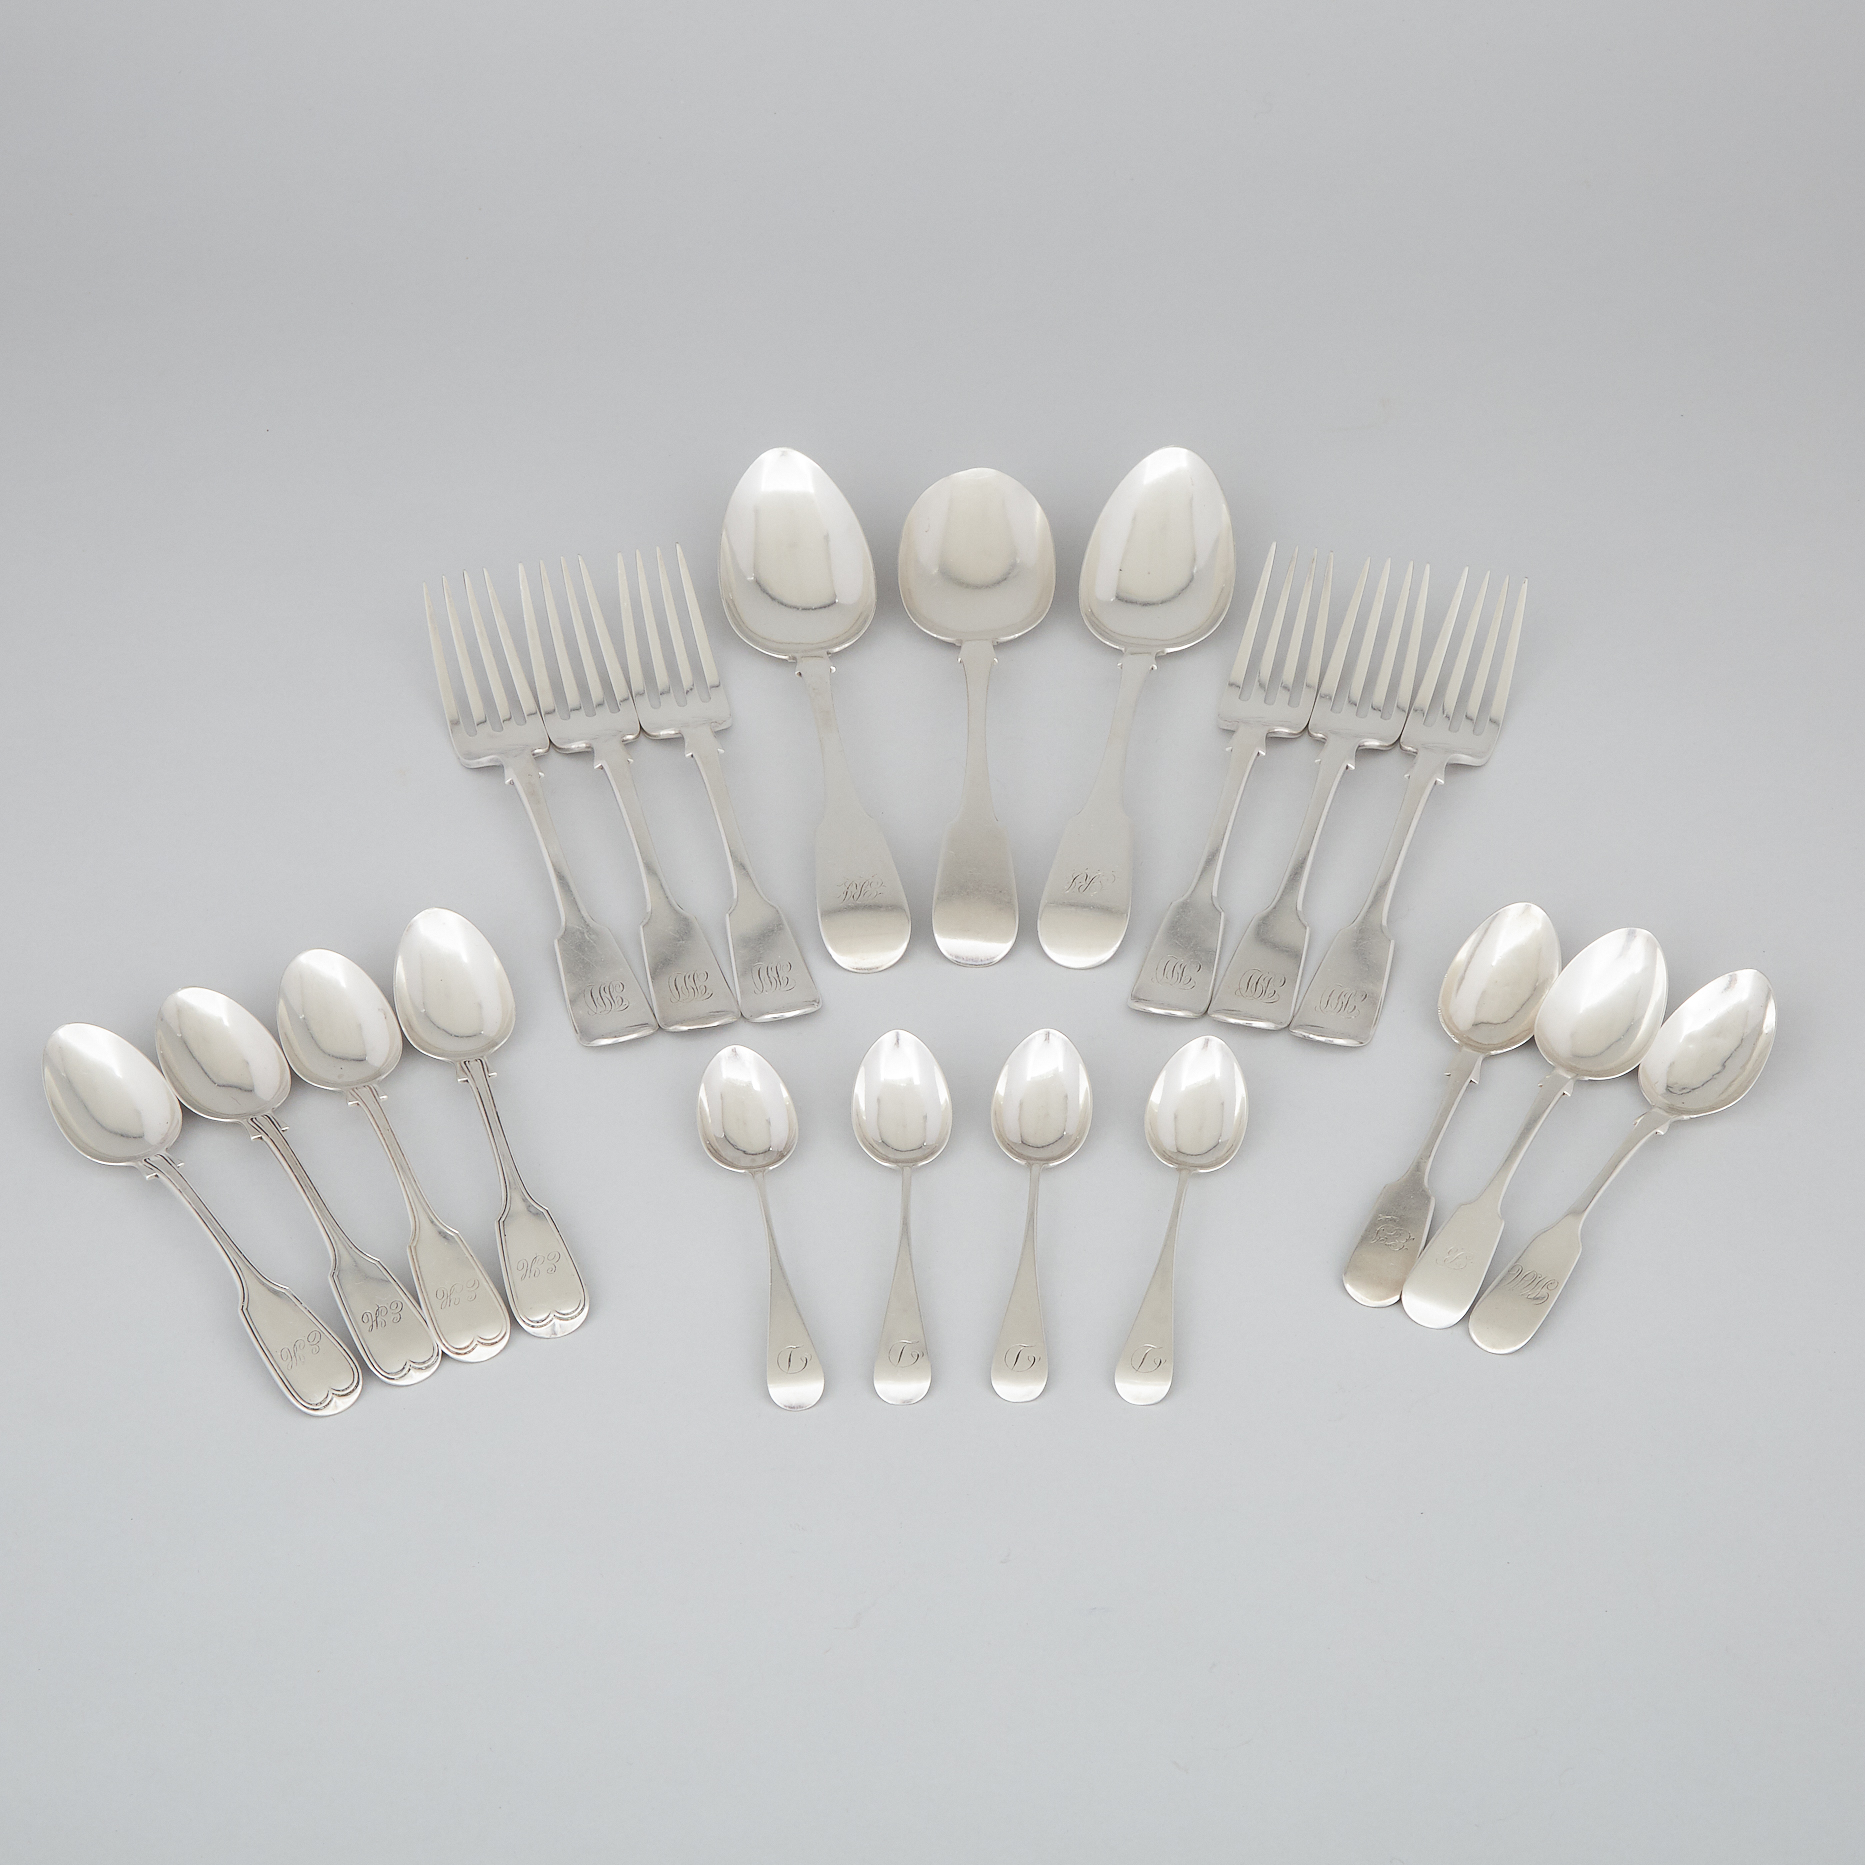 Group of Canadian Silver Mainly Fiddle Pattern Flatware, Montreal, Que., 19th century